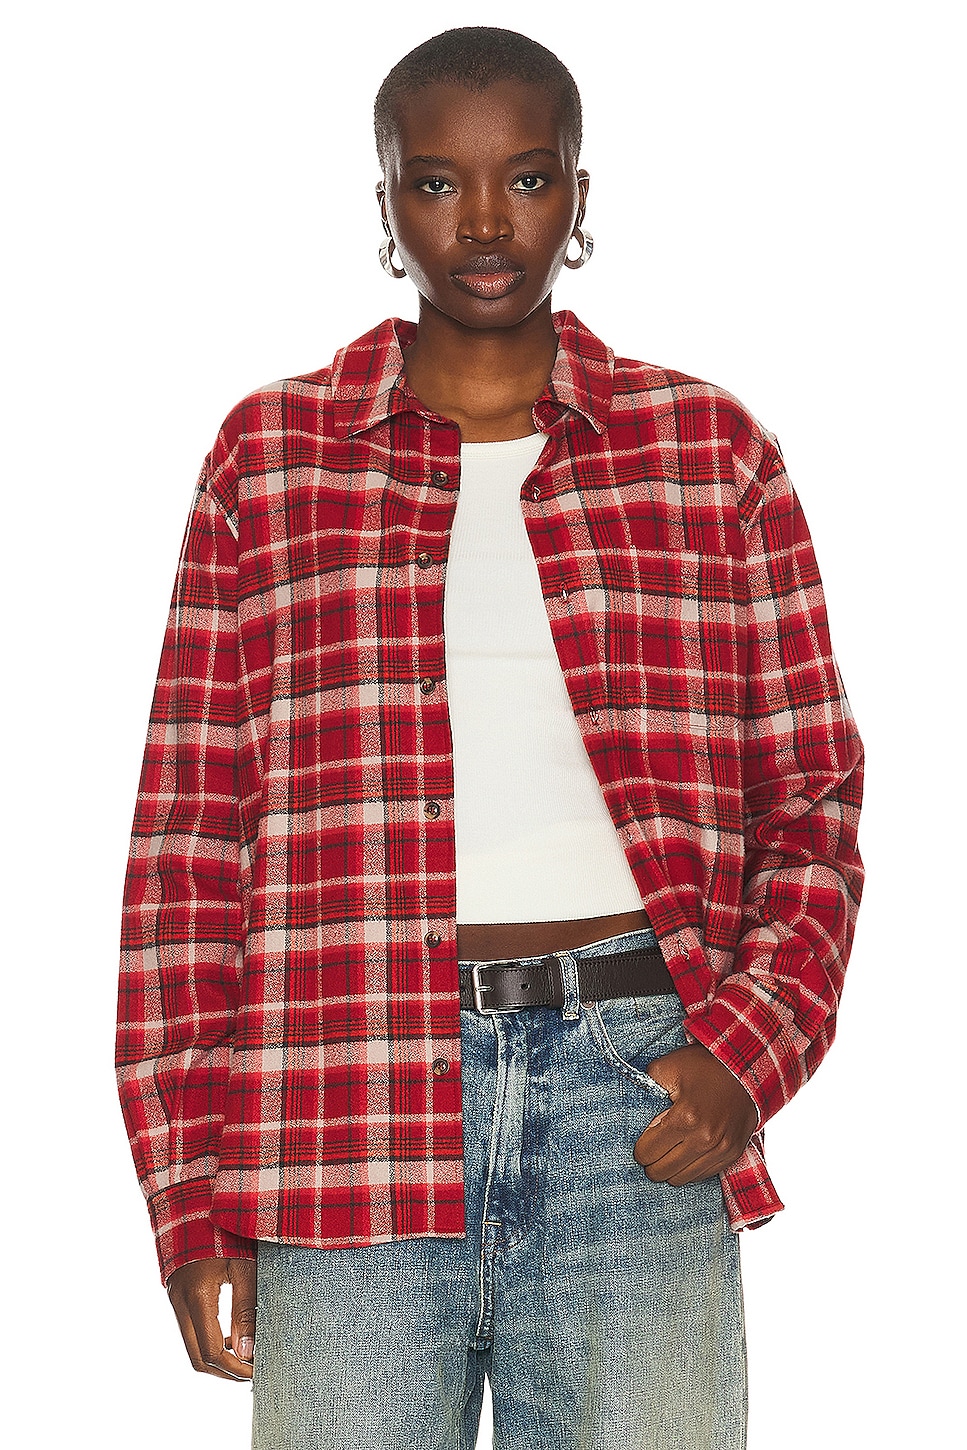 Image 1 of WAO The Flannel Shirt in red & cream